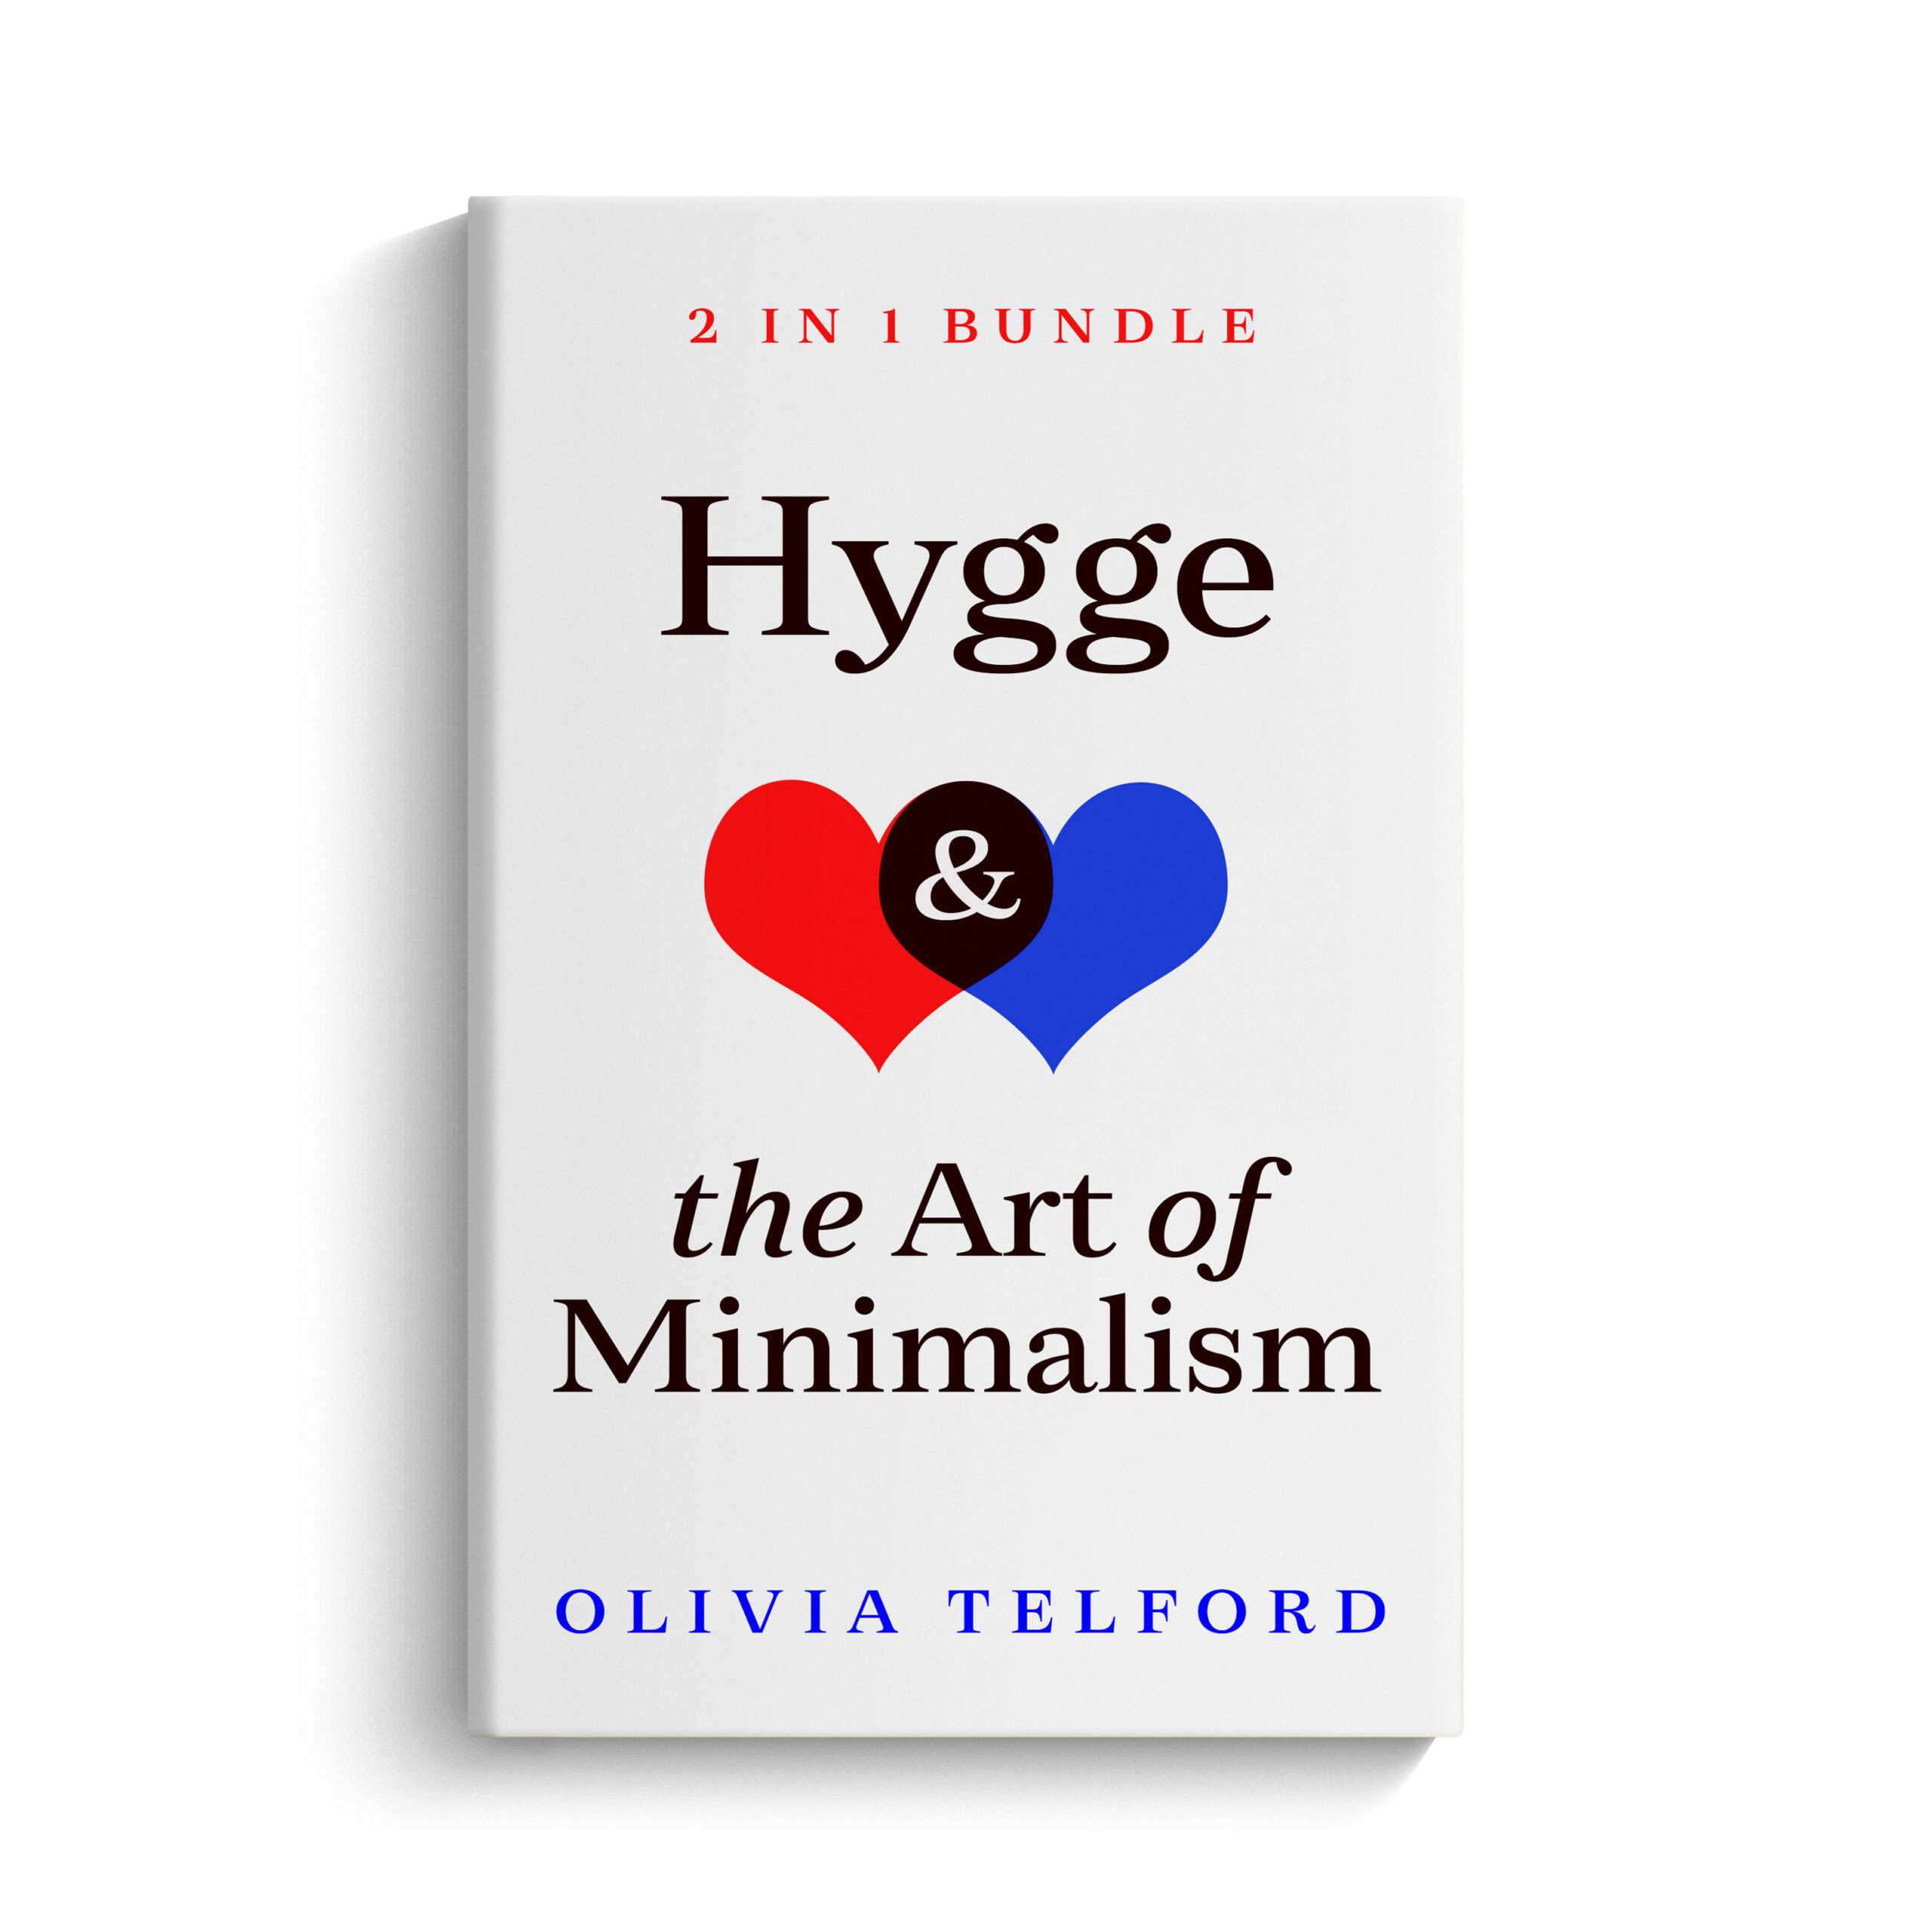 Hygge and The Art of Minimalism by Olivia Telford